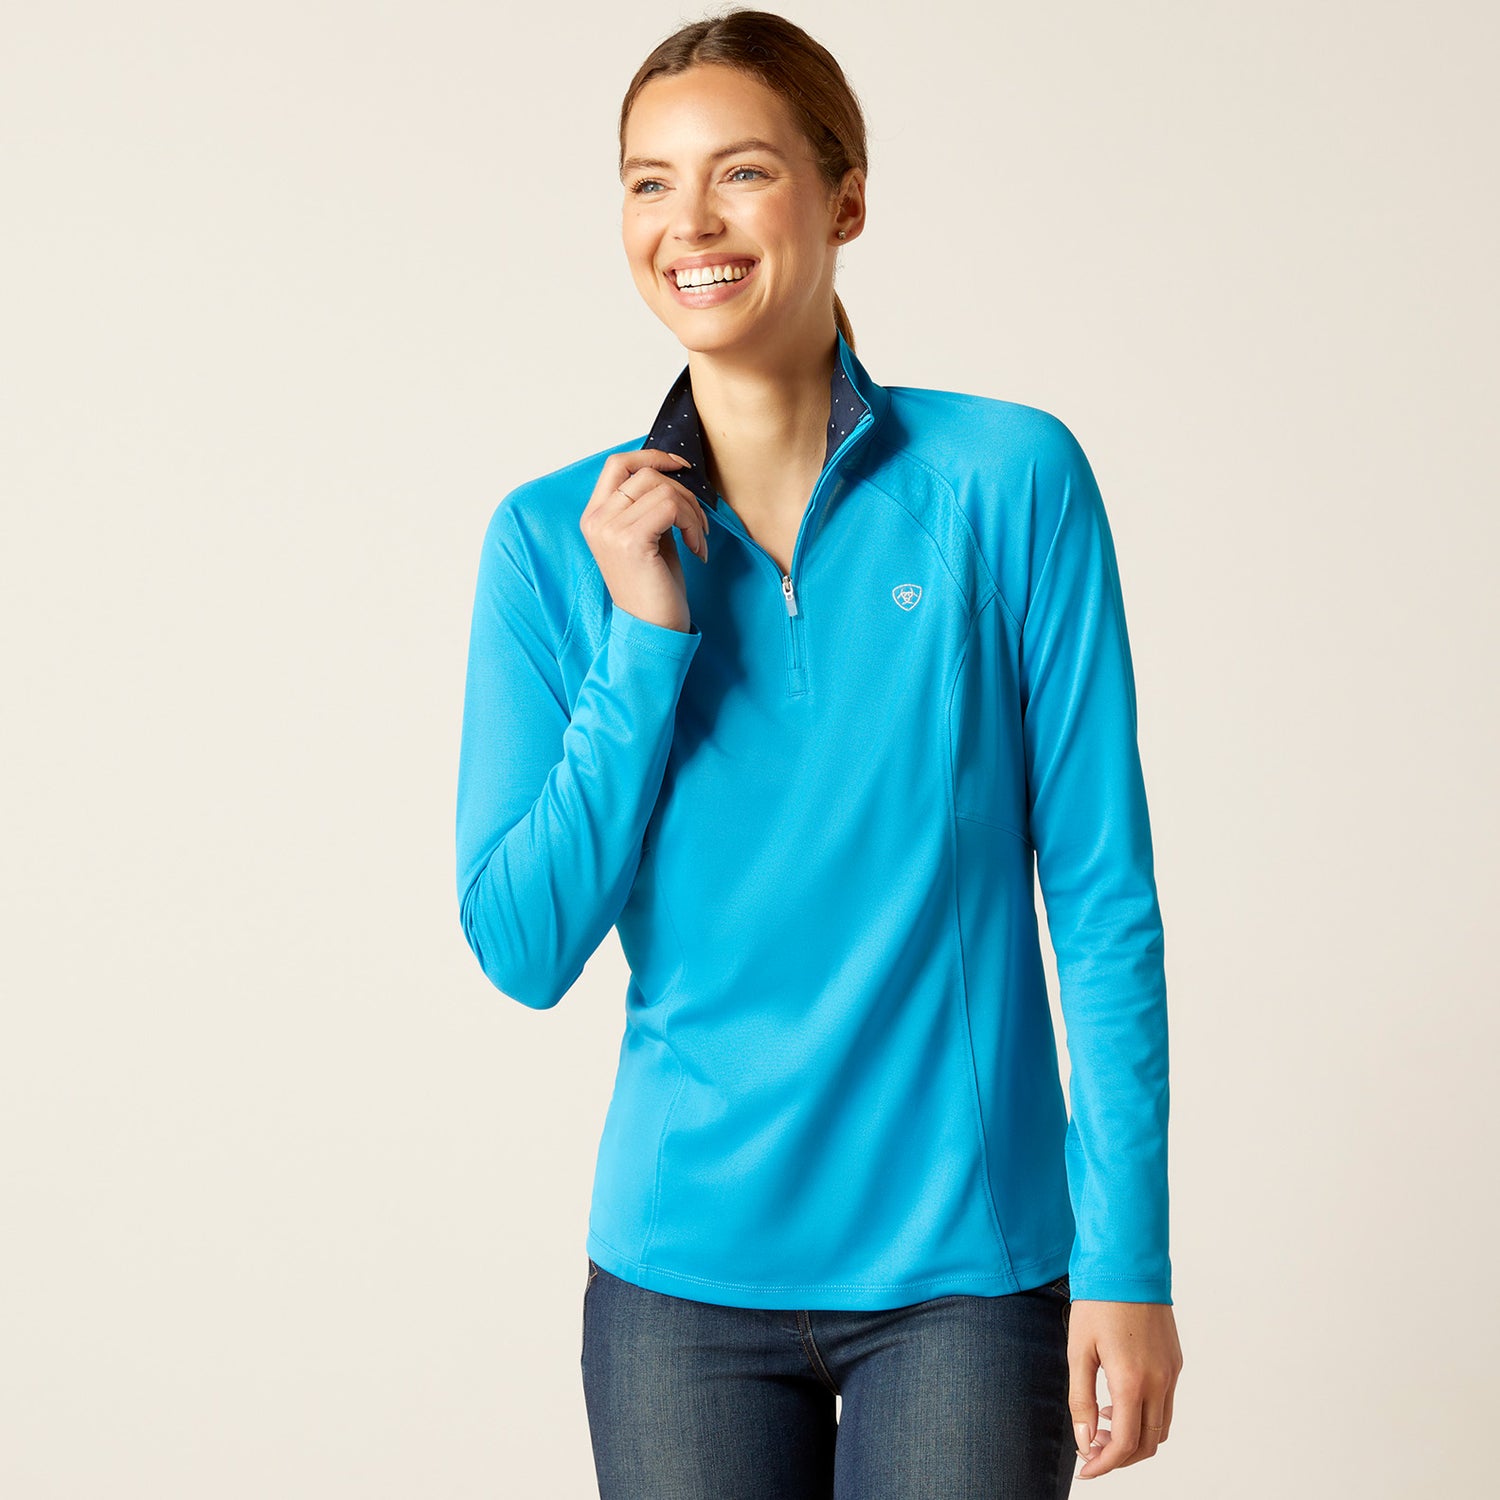 Ariat Womens Sunstopper 2.0 1/4 Zip Top – New Forest Clothing